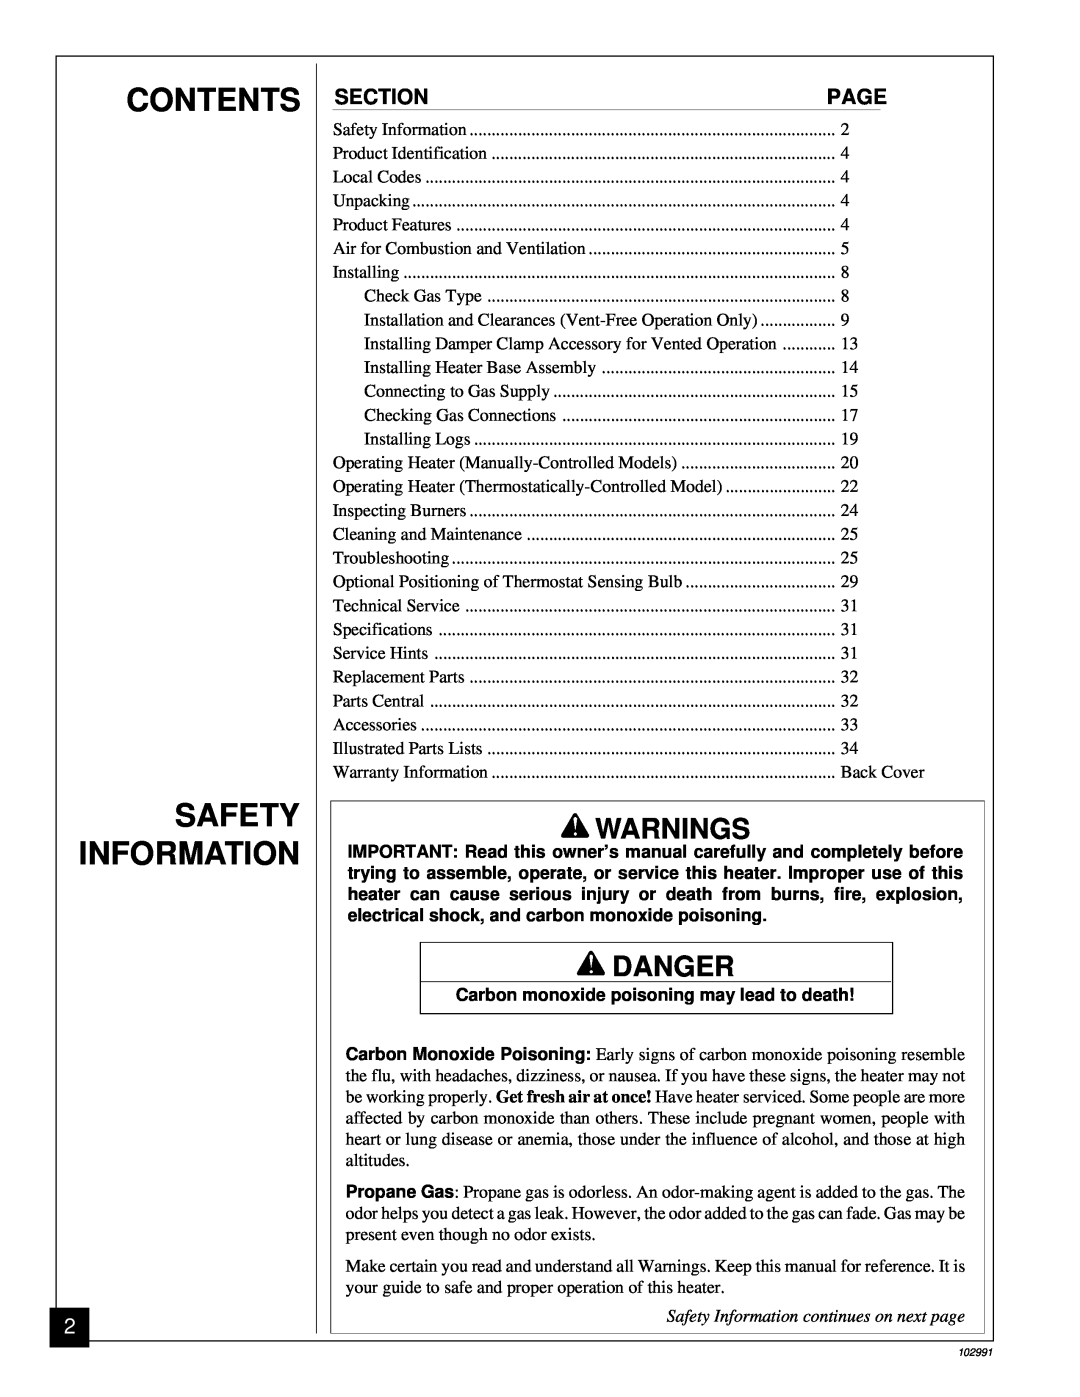 Desa Tech CGD3930P, CGD3018P Contents Safety Information, Warnings, Danger, Carbon monoxide poisoning may lead to death 